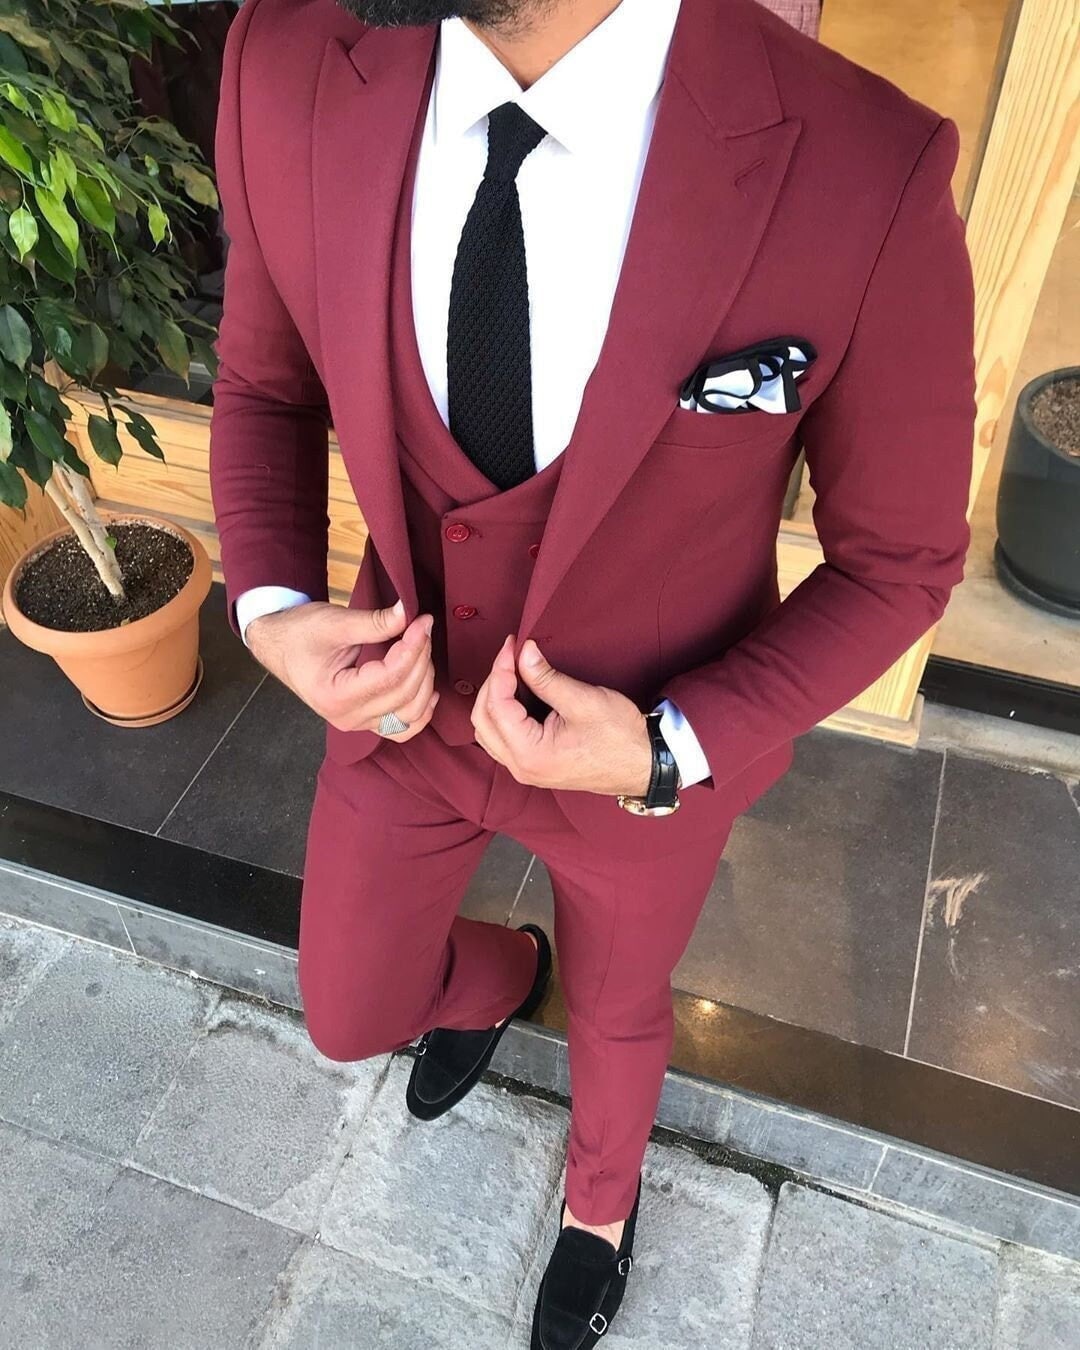 Men's Maroon Burgundy Suit Styles! Giorgenti Formal Suits | Mens fashion  suits, Mens fashion suits casual, Dress suits for men